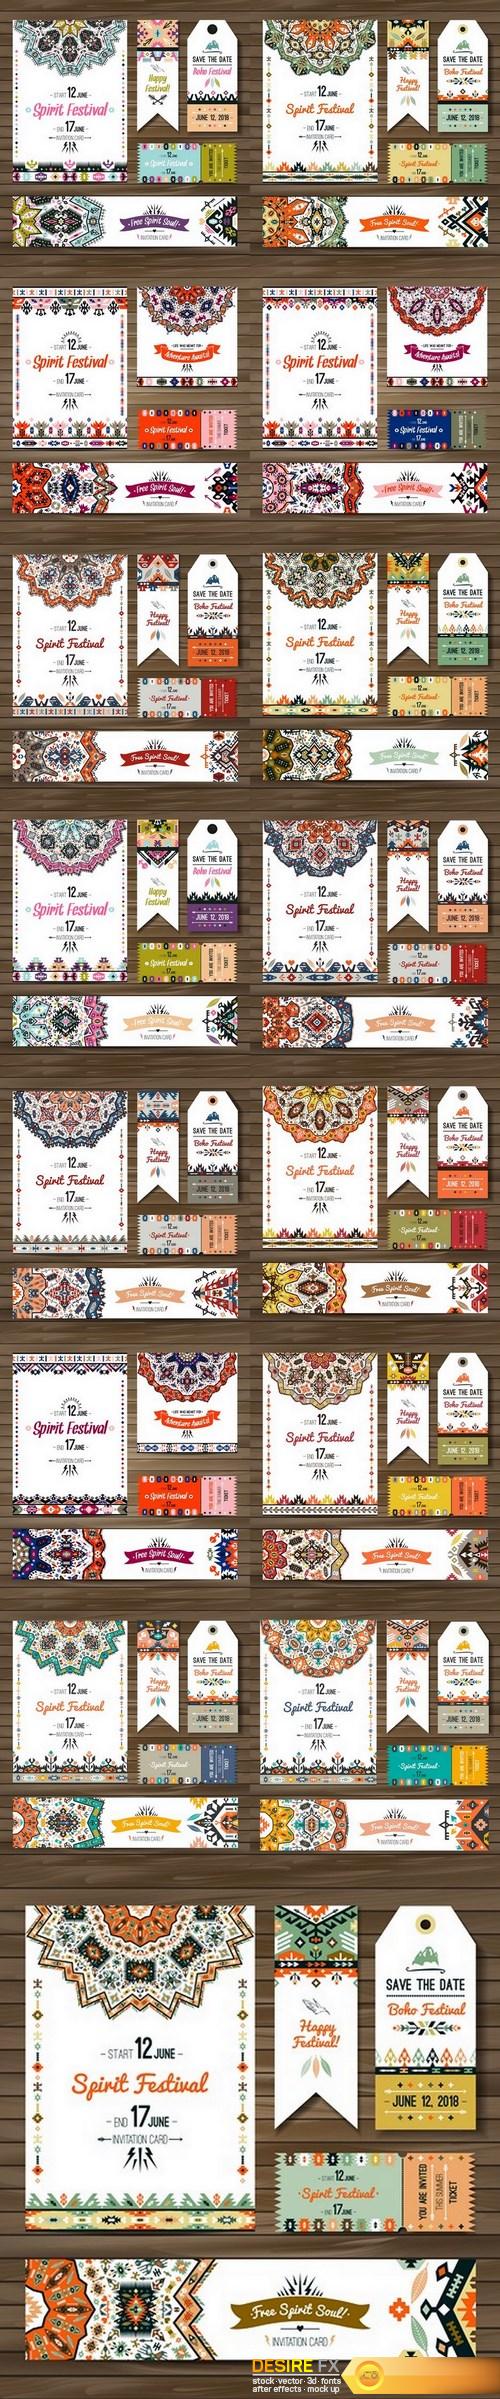 Ethnic Ornaments Tags And Banners - 15 Vector